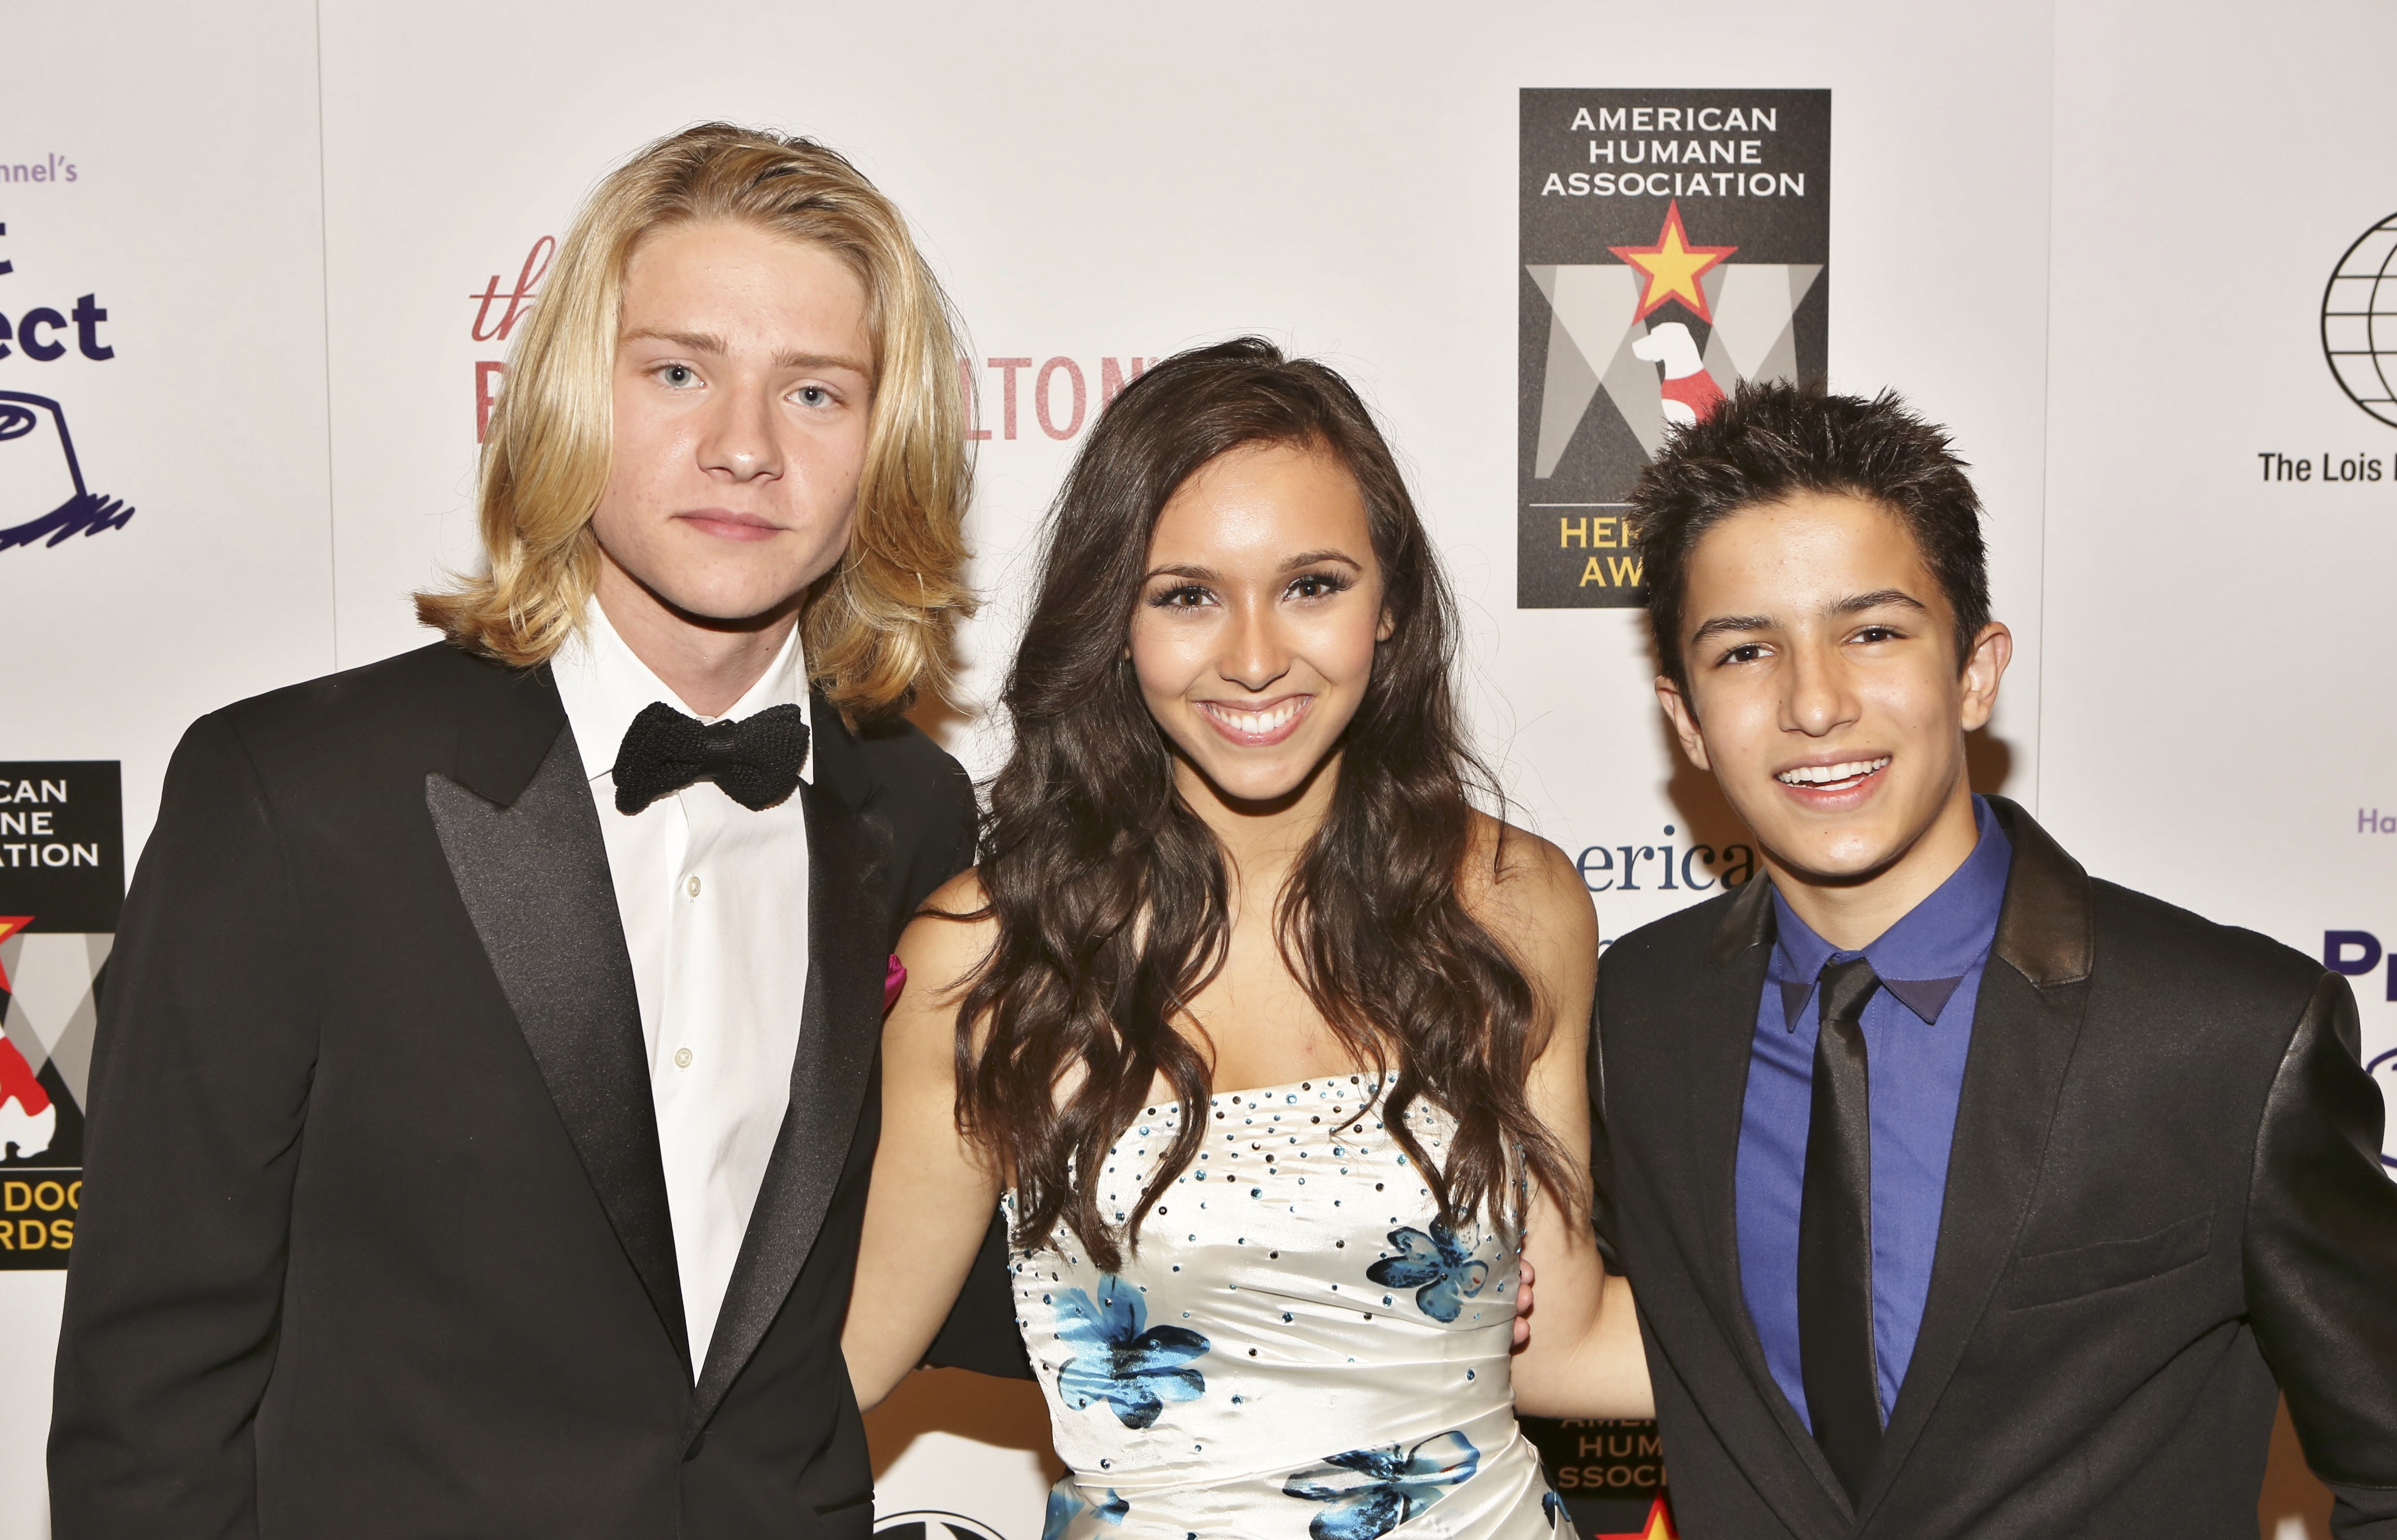 Young Hollywood for Humanity at the 2013 Hero Dog Awards, Beverly Hilton. Lou Wegner, Nicole Cummins and Aramis Knight.